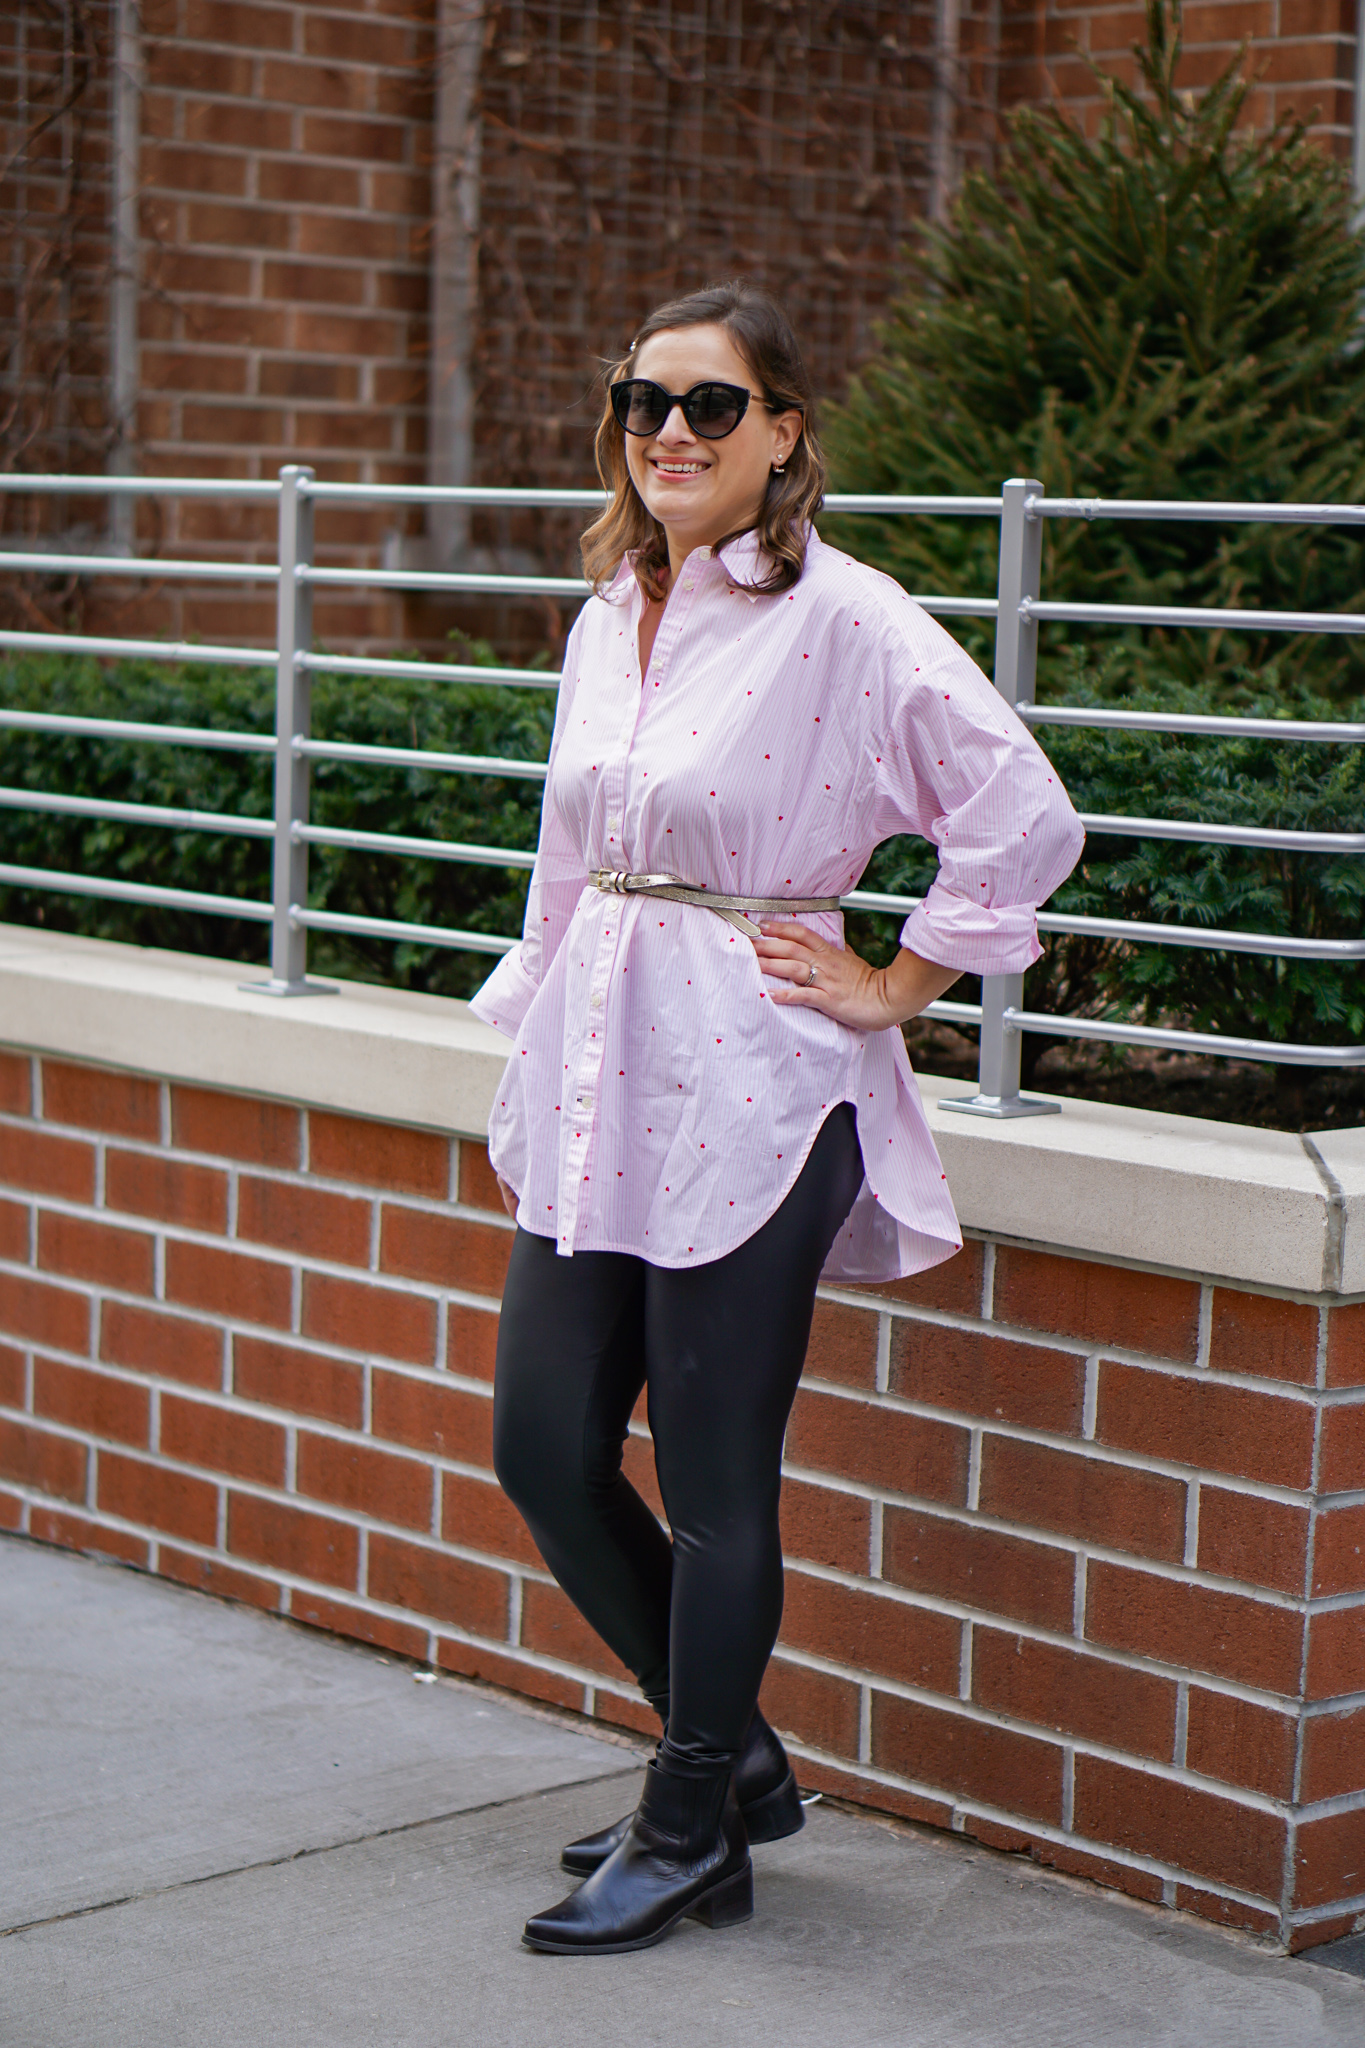 How to style an oversized shirt